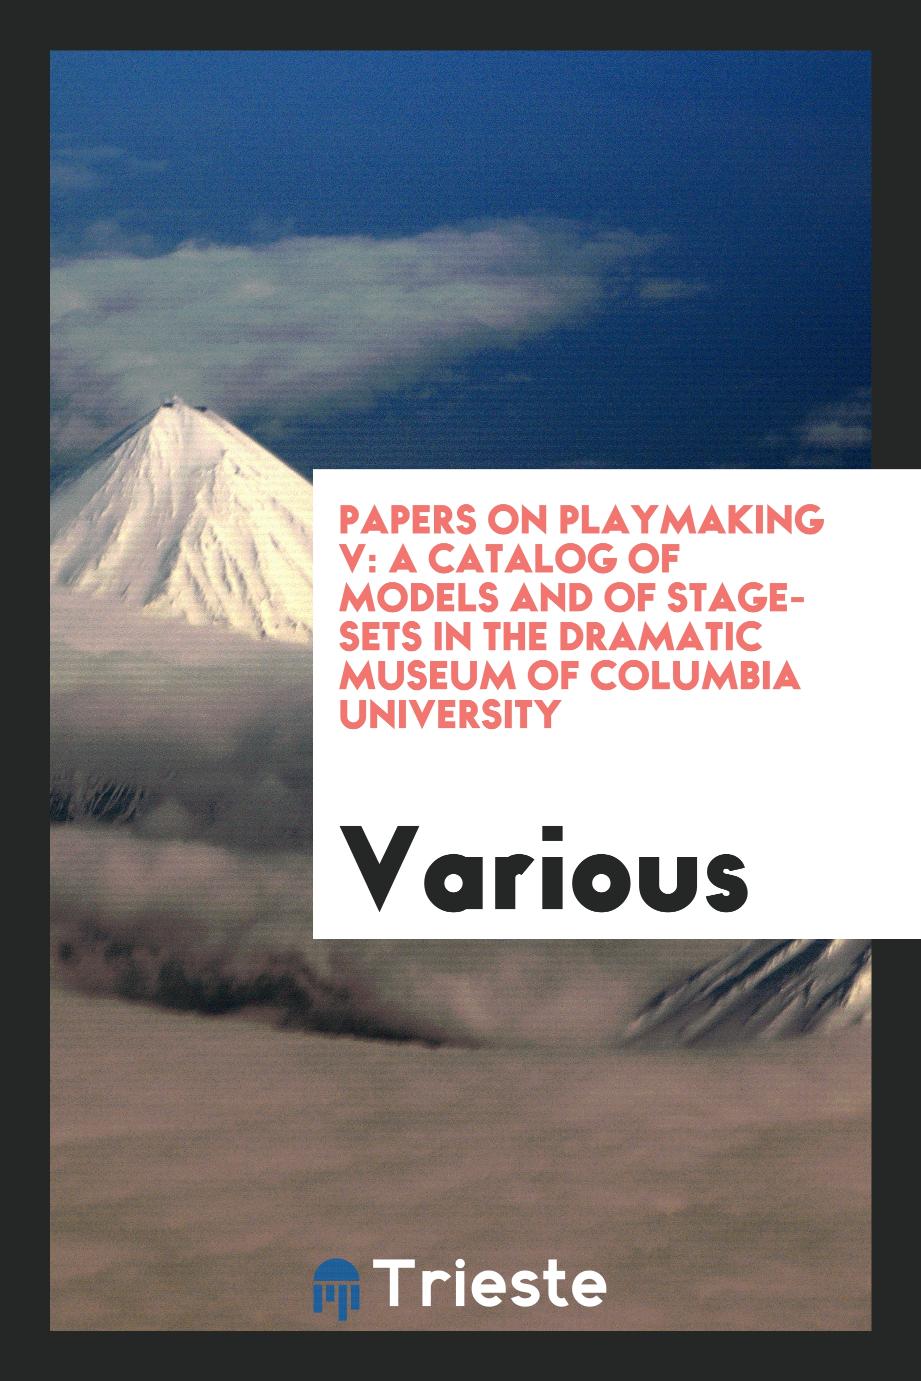 Papers on Playmaking V: A Catalog of Models and of Stage-sets in the Dramatic Museum of Columbia University